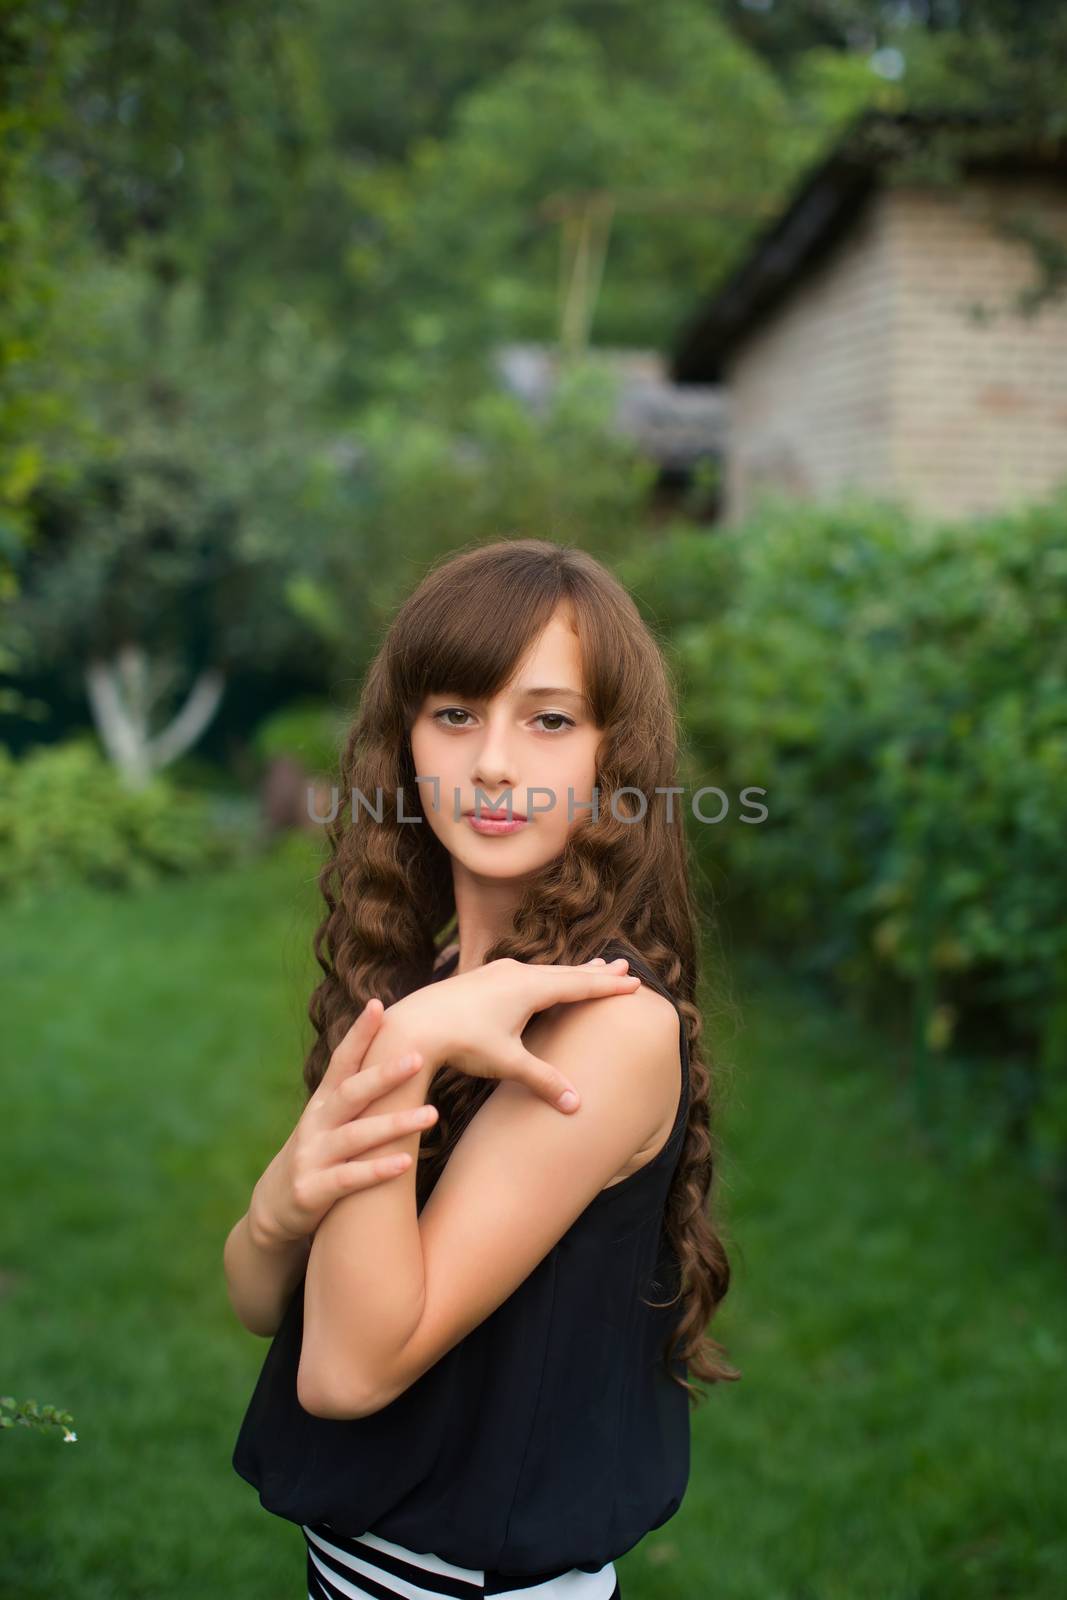 Girl with long hair on nature in a warm summer day